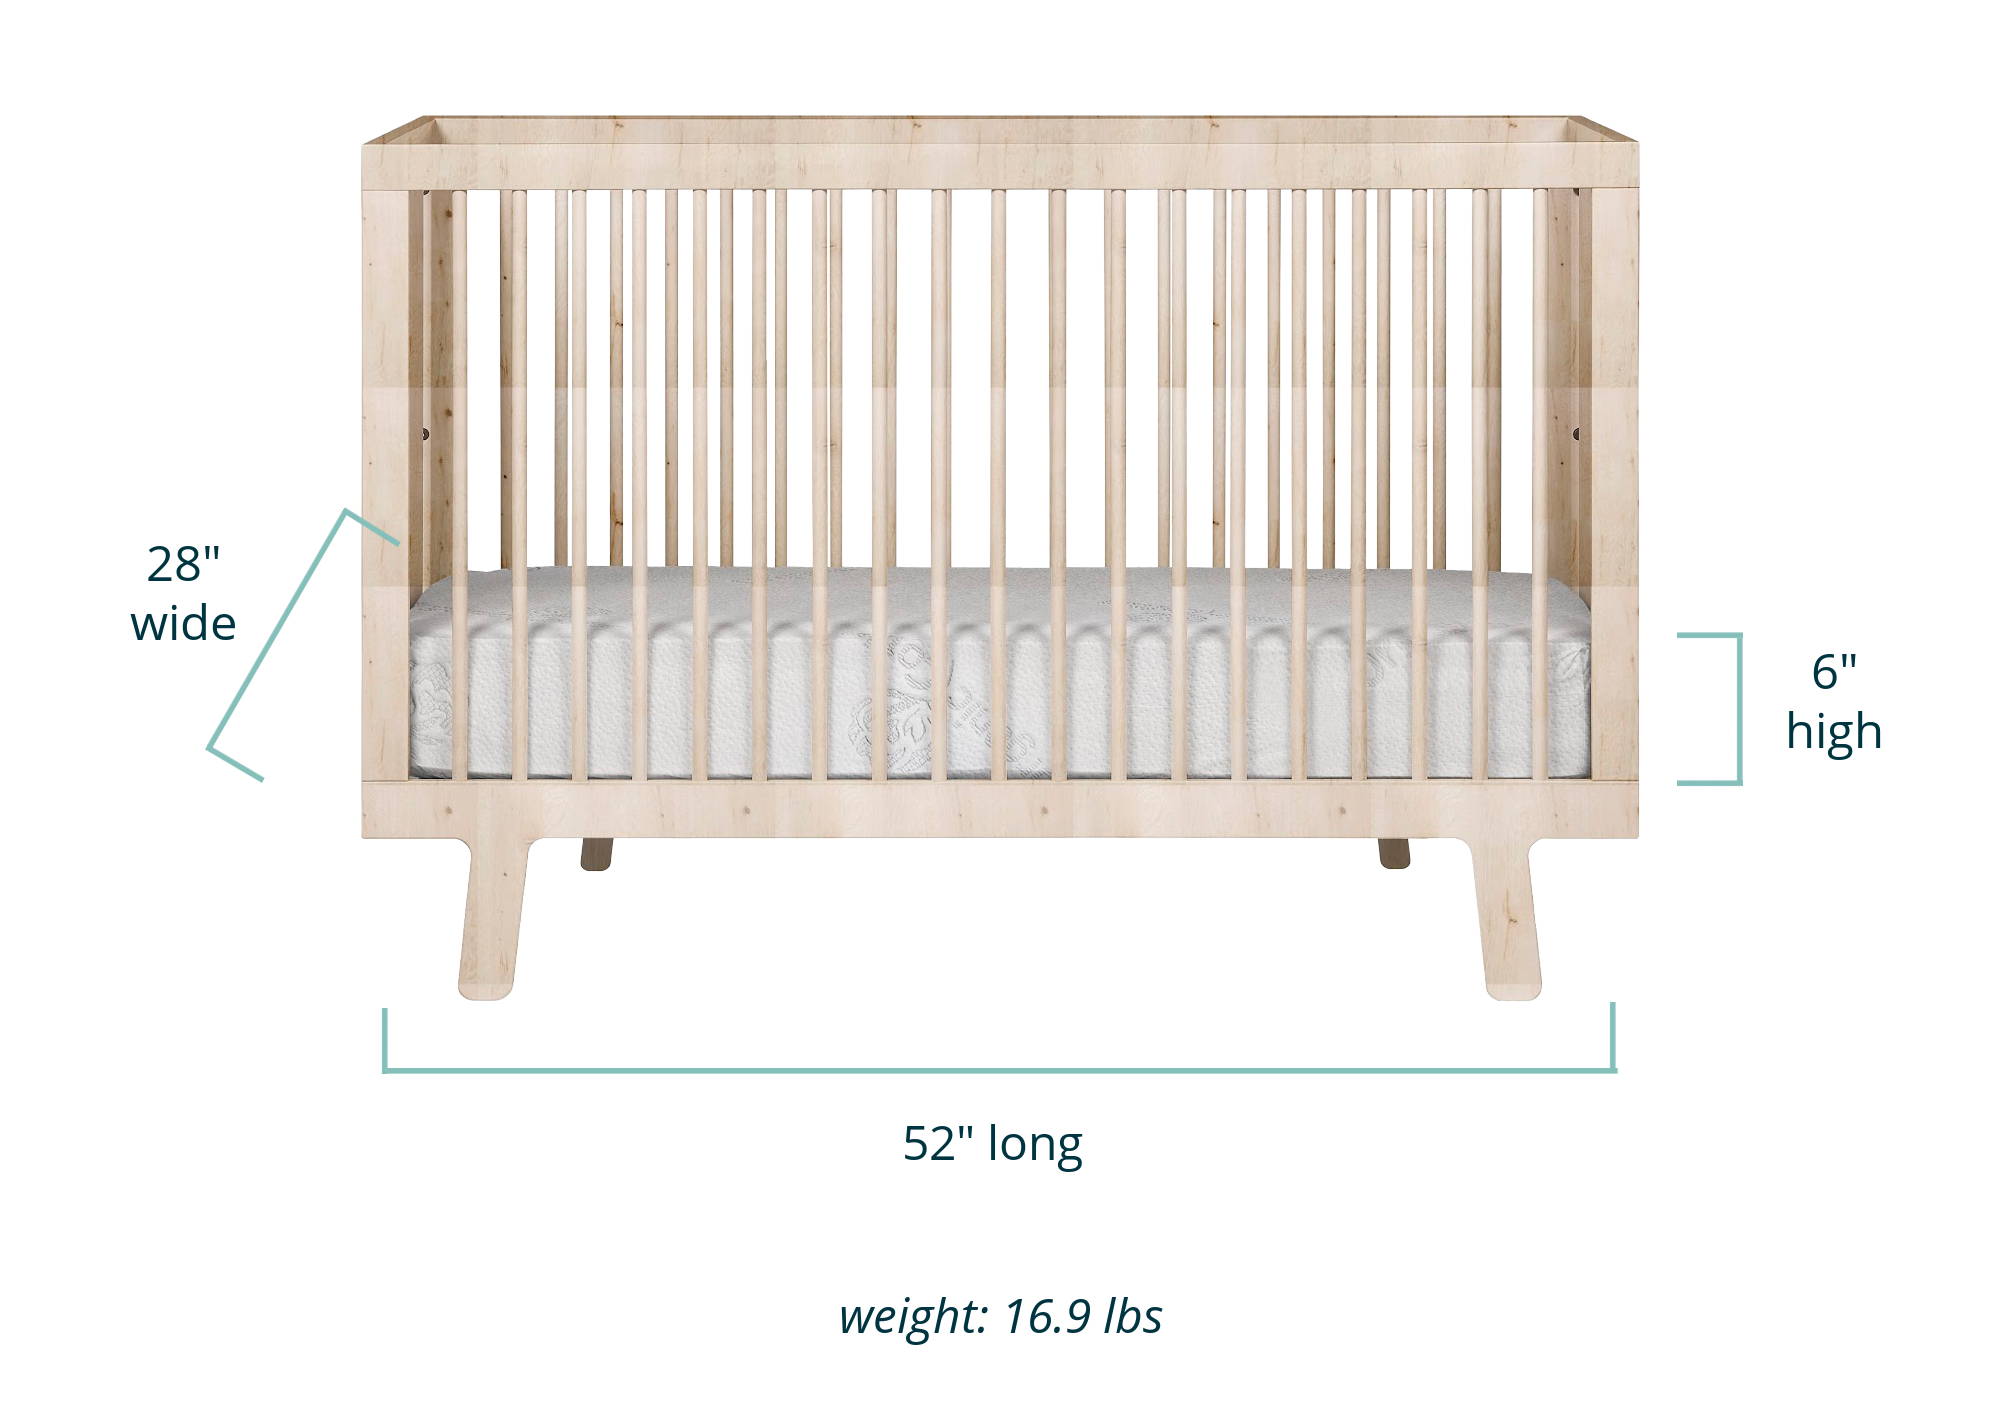 Hybrid Support Luxe crib mattress in a crib showing dimensions of 28